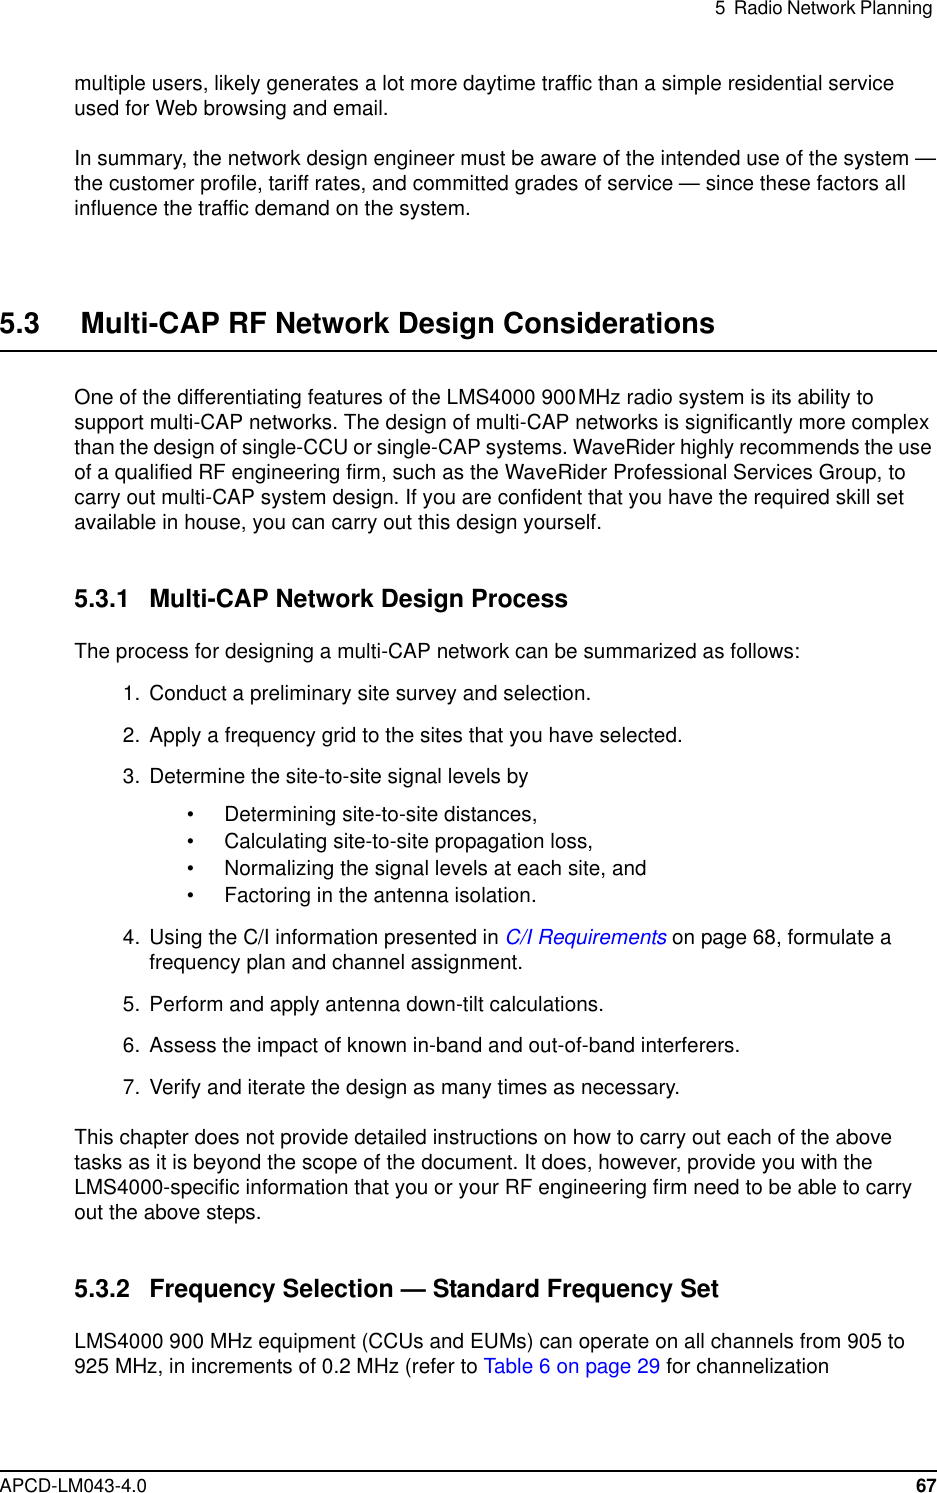 5 Radio Network PlanningAPCD-LM043-4.0 67multiple users, likely generates a lot more daytime traffic than a simple residential serviceused for Web browsing and email.In summary, the network design engineer must be aware of the intended use of the system —the customer profile, tariff rates, and committed grades of service — since these factors allinfluence the traffic demand on the system.5.3 Multi-CAP RF Network Design ConsiderationsOne of the differentiating features of the LMS4000 900MHz radio system is its ability tosupport multi-CAP networks. The design of multi-CAP networks is significantly more complexthan the design of single-CCU or single-CAP systems. WaveRider highly recommends the useof a qualified RF engineering firm, such as the WaveRider Professional Services Group, tocarry out multi-CAP system design. If you are confident that you have the required skill setavailable in house, you can carry out this design yourself.5.3.1 Multi-CAP Network Design ProcessThe process for designing a multi-CAP network can be summarized as follows:1. Conduct a preliminary site survey and selection.2. Apply a frequency grid to the sites that you have selected.3. Determine the site-to-site signal levels by• Determining site-to-site distances,• Calculating site-to-site propagation loss,• Normalizing the signal levels at each site, and• Factoring in the antenna isolation.4. Using the C/I information presented in C/I Requirements on page 68, formulate afrequency plan and channel assignment.5. Perform and apply antenna down-tilt calculations.6. Assess the impact of known in-band and out-of-band interferers.7. Verify and iterate the design as many times as necessary.This chapter does not provide detailed instructions on how to carry out each of the abovetasks as it is beyond the scope of the document. It does, however, provide you with theLMS4000-specific information that you or your RF engineering firm need to be able to carryout the above steps.5.3.2 Frequency Selection — Standard Frequency SetLMS4000 900 MHz equipment (CCUs and EUMs) can operate on all channels from 905 to925 MHz, in increments of 0.2 MHz (refer to Table 6 on page 29 for channelization